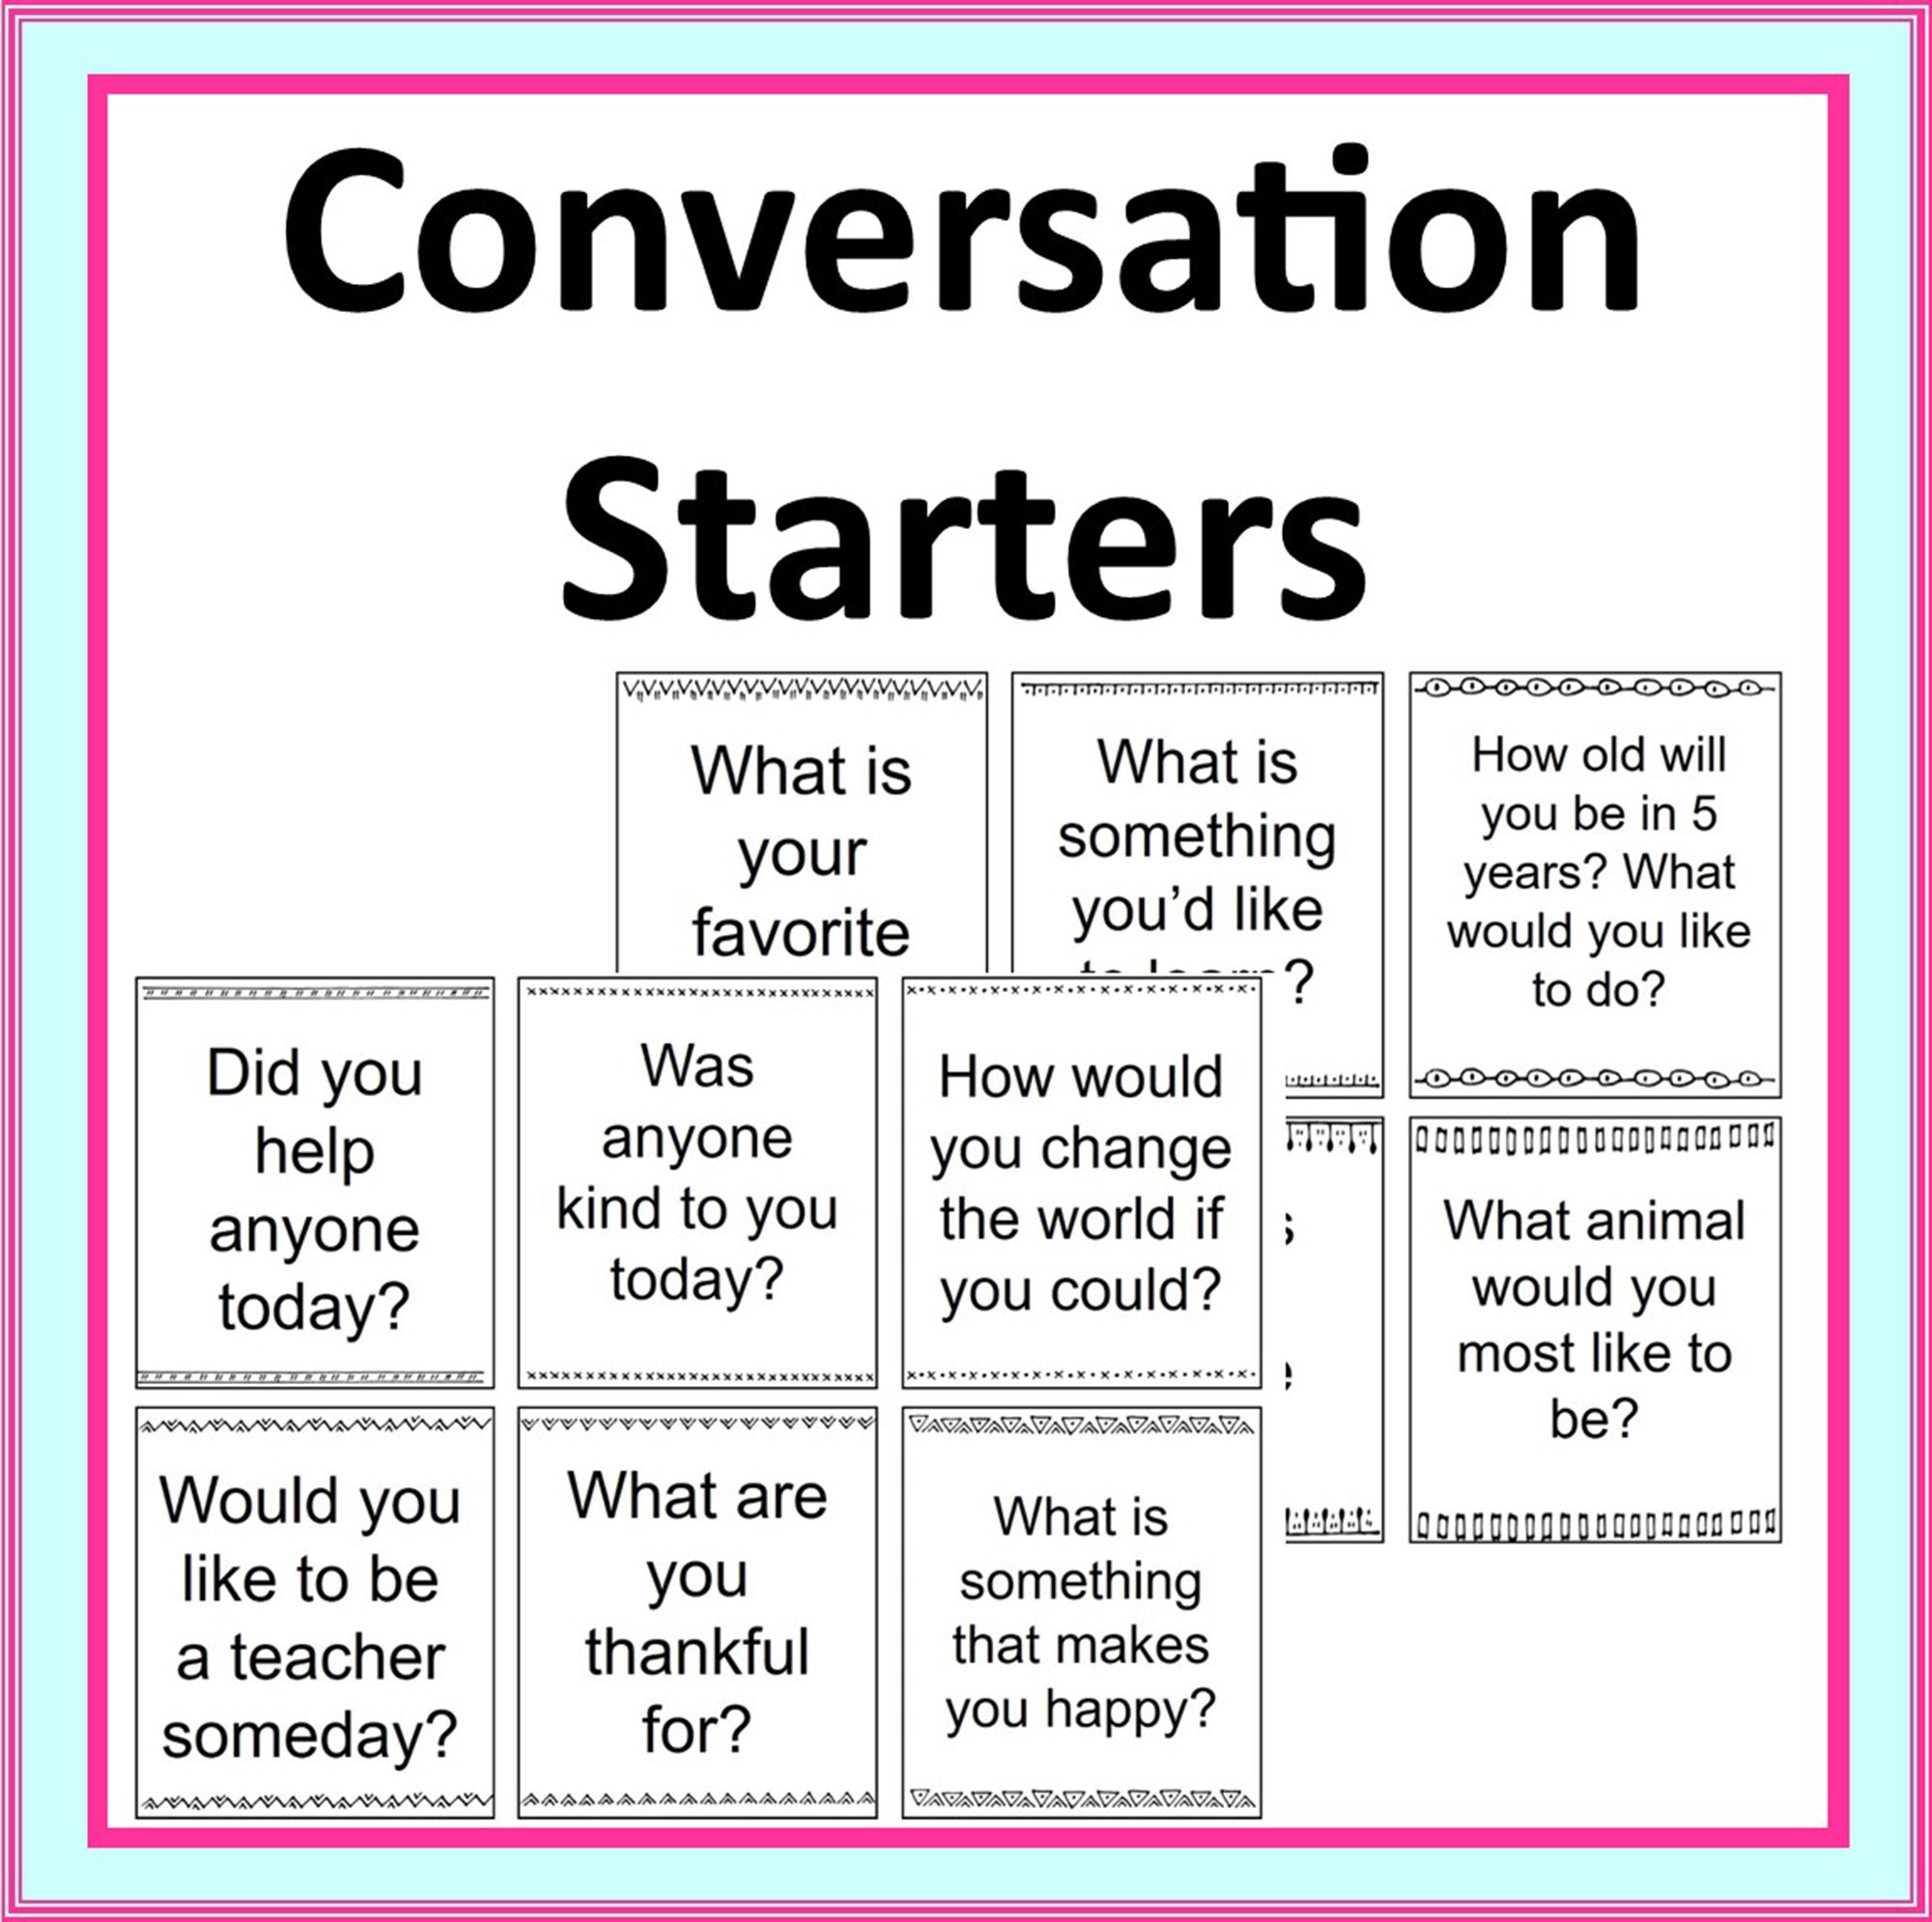 On Topic Off Topic Conversation Sorting Game Family - ordering